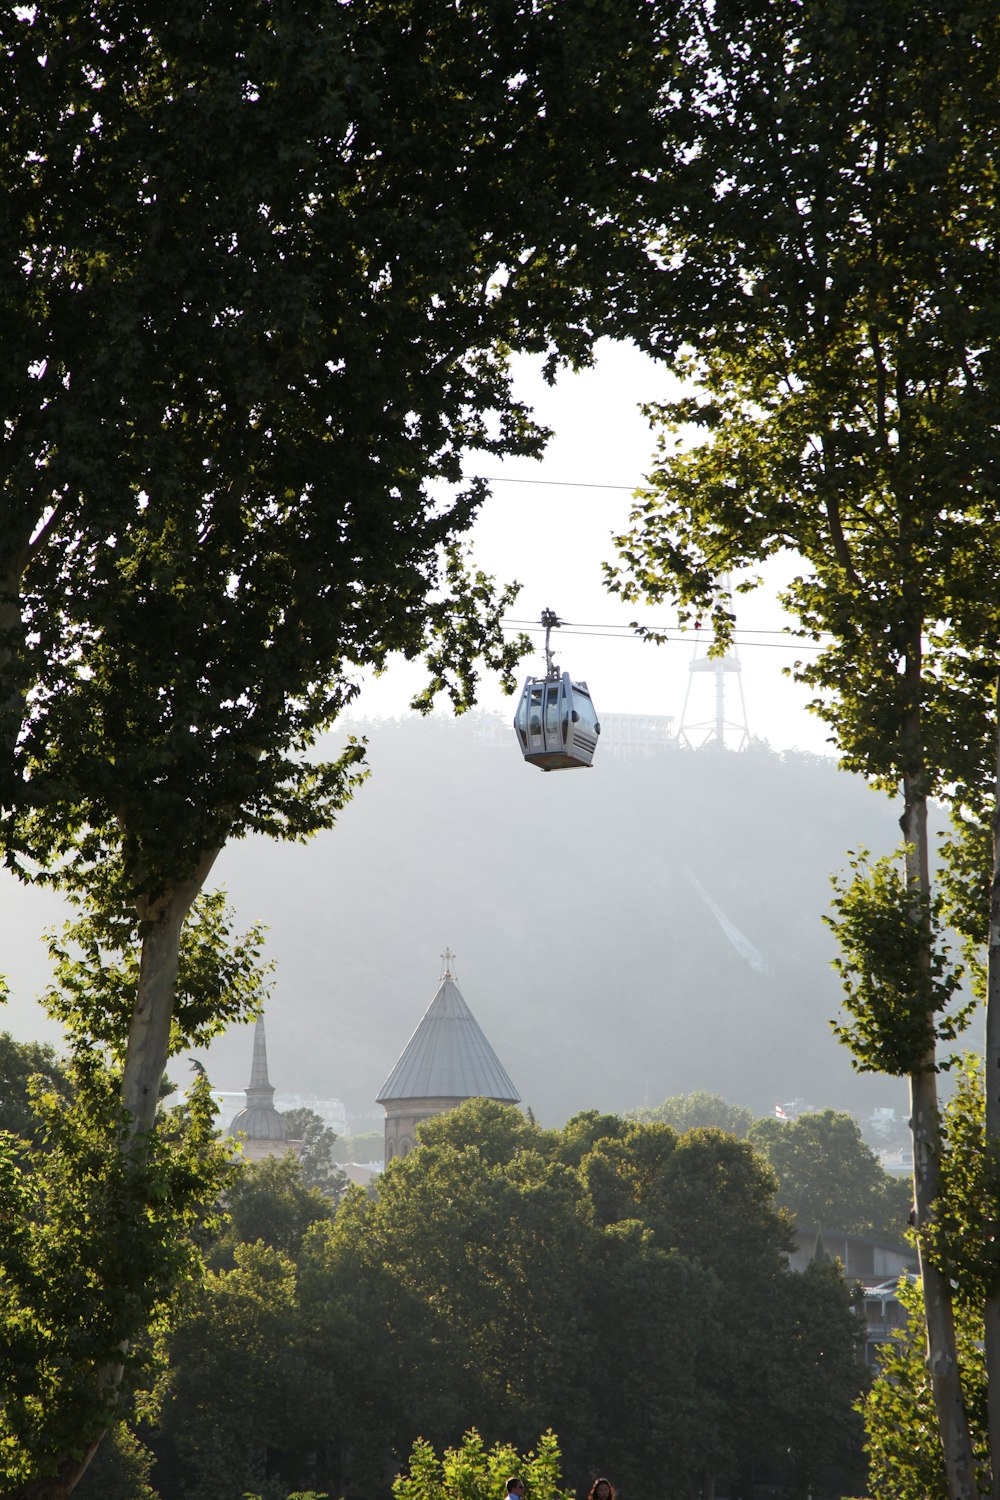 a gondola suspended over a park with trees in the foreground